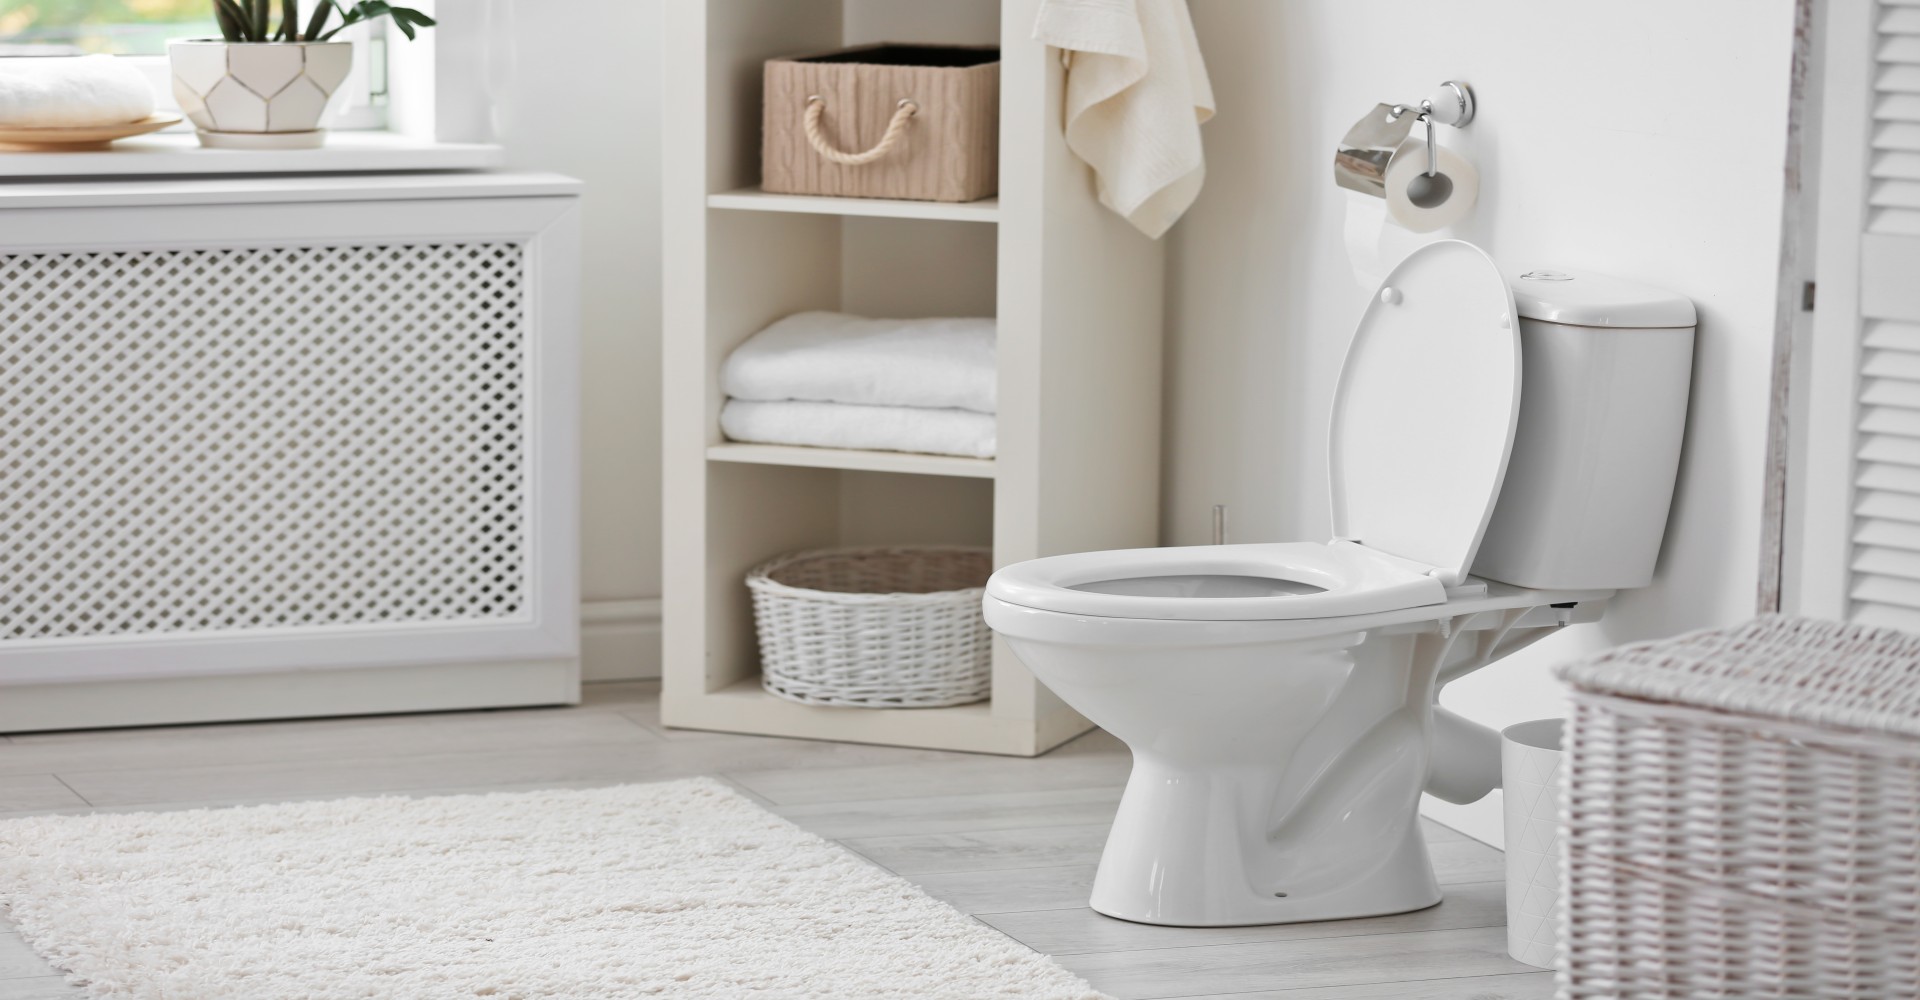  What Causes Rust Stains in Toilet